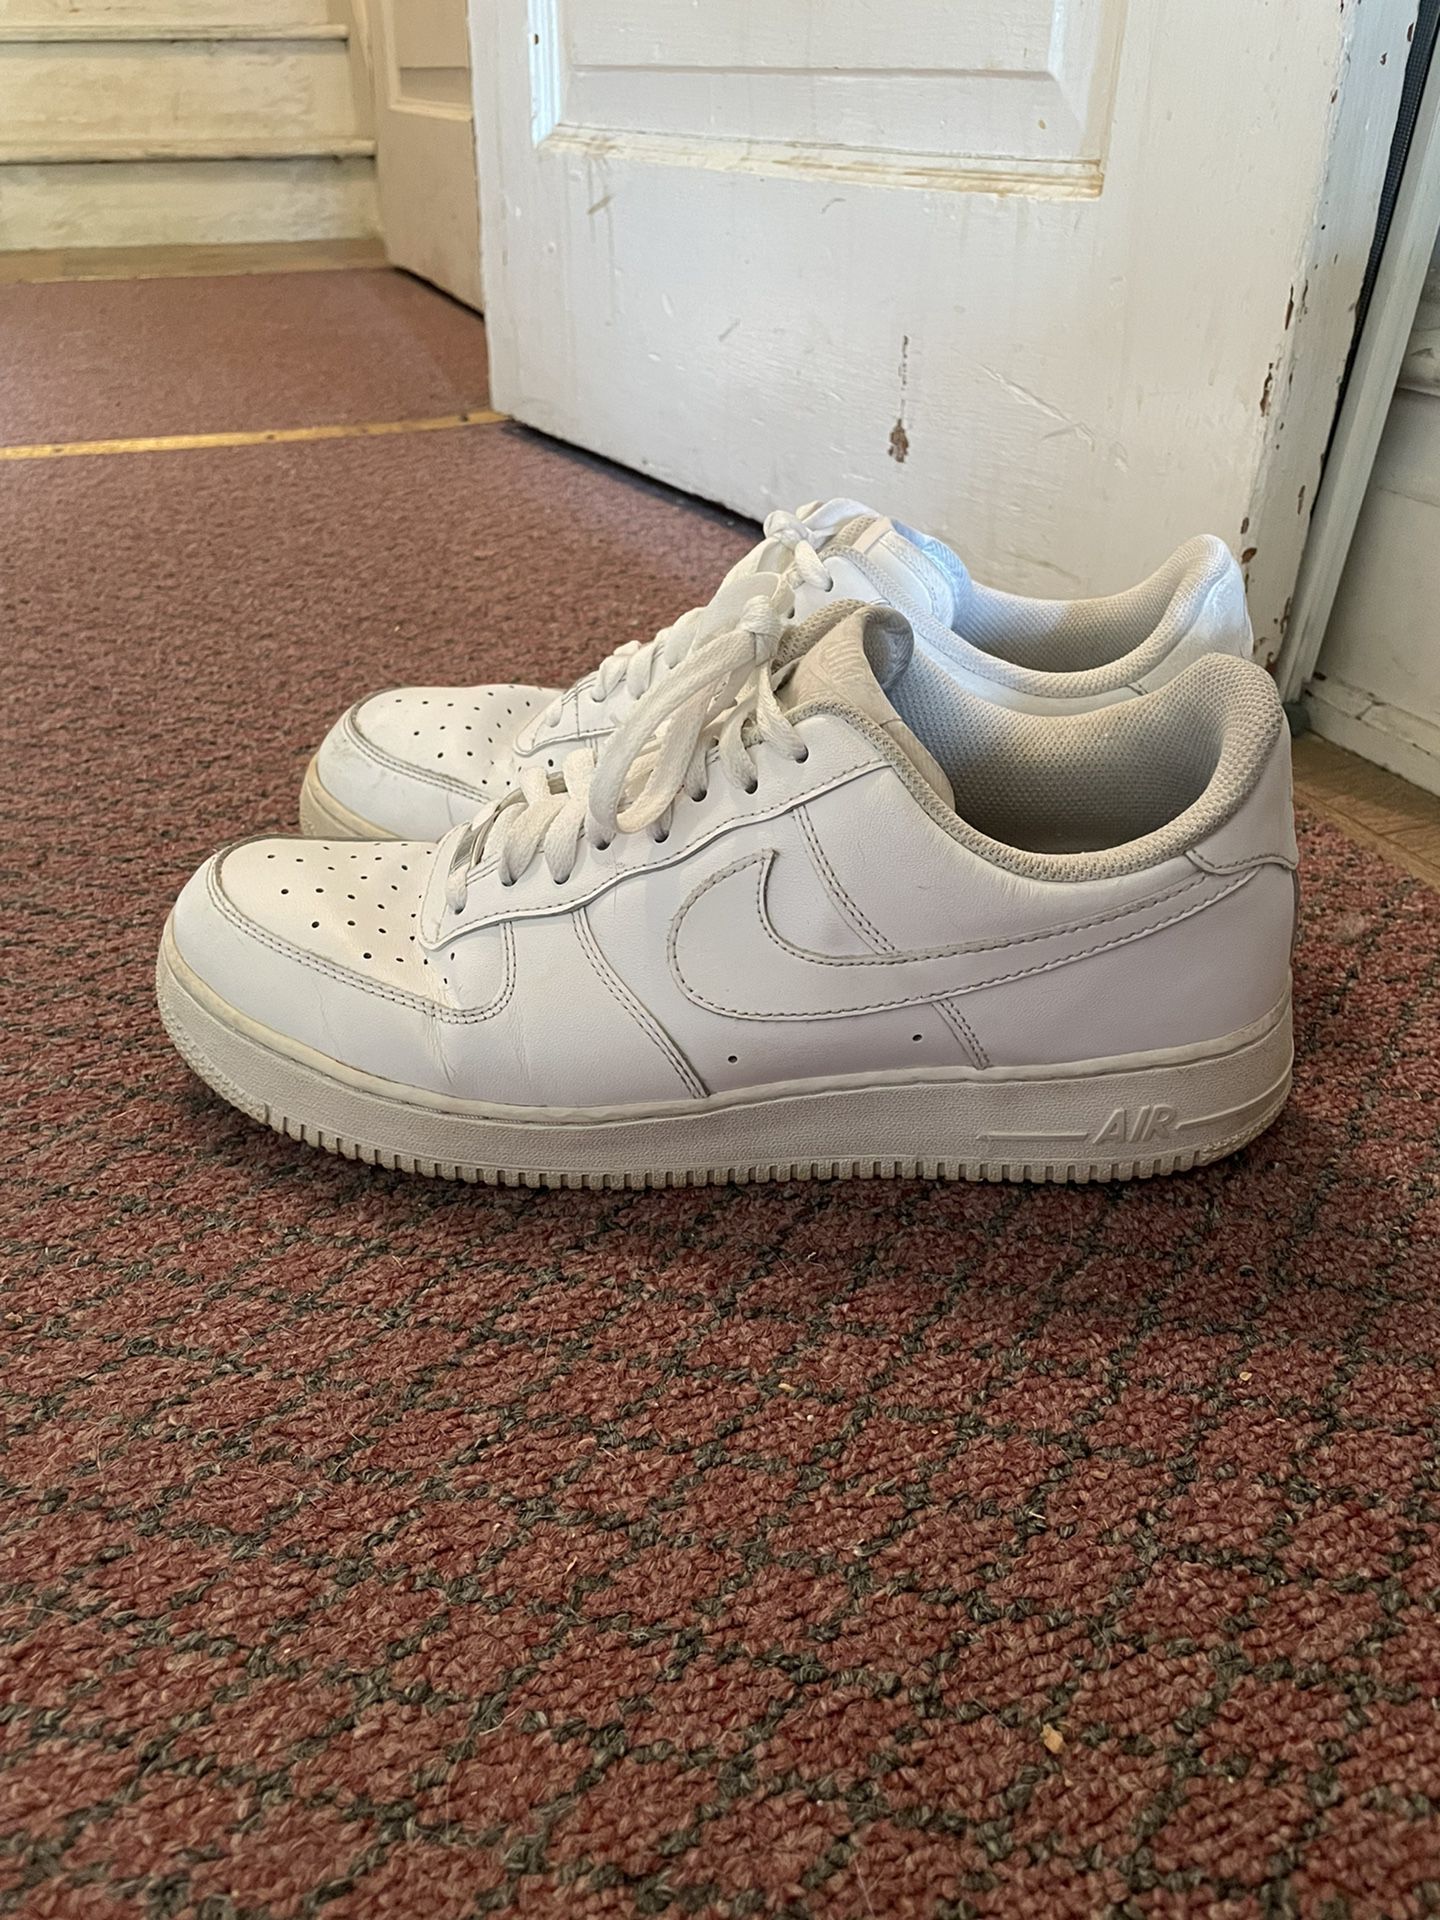 White Air Force 1 2013 for Sale West York, PA - OfferUp